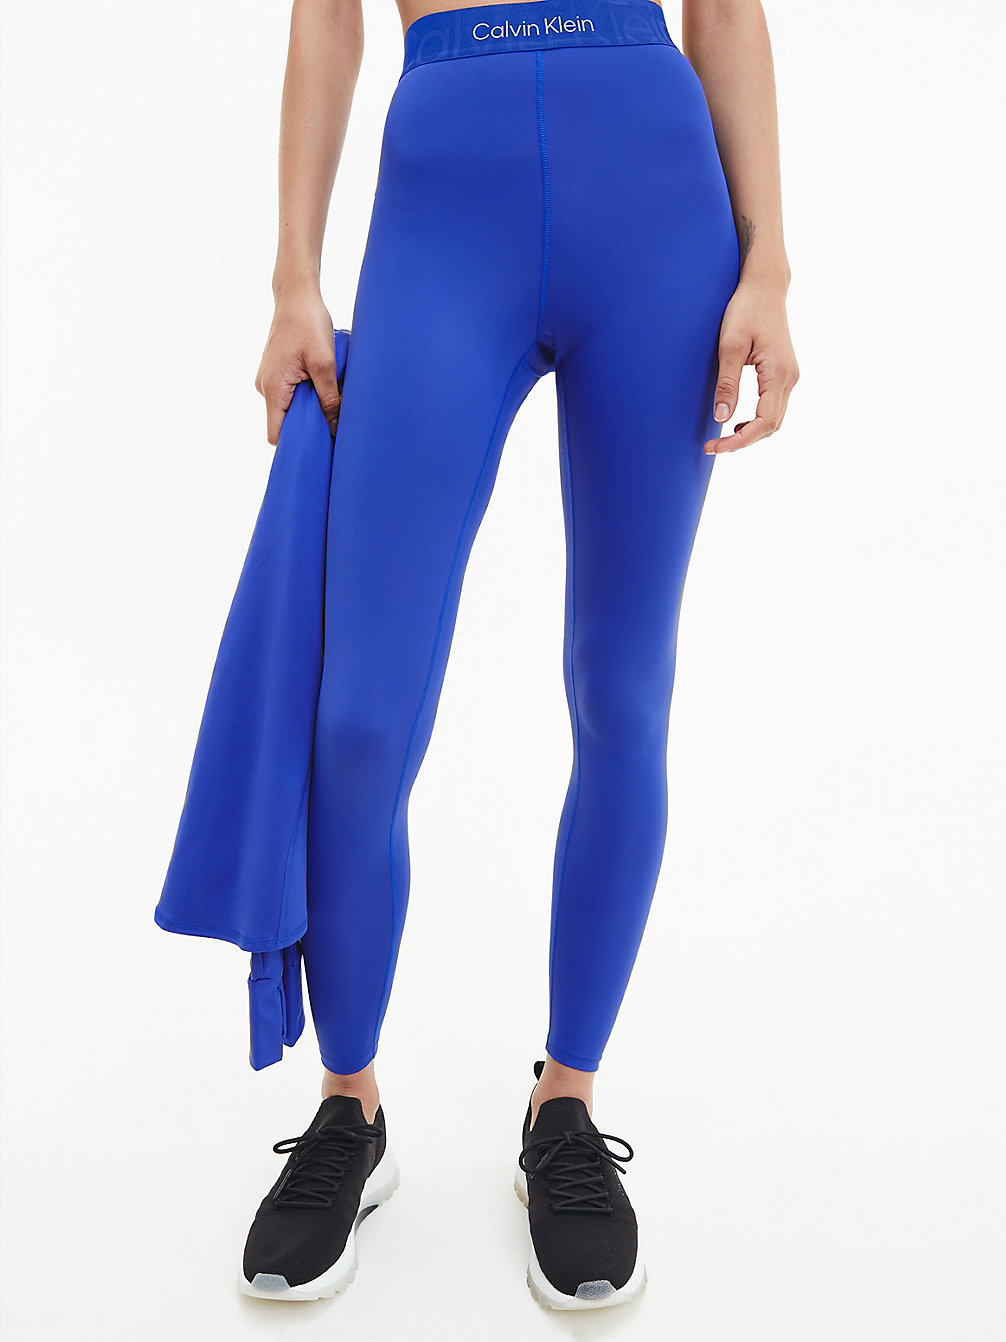 CLEMATIS BLUE Recycled 7/8 Gym Leggings undefined women Calvin Klein